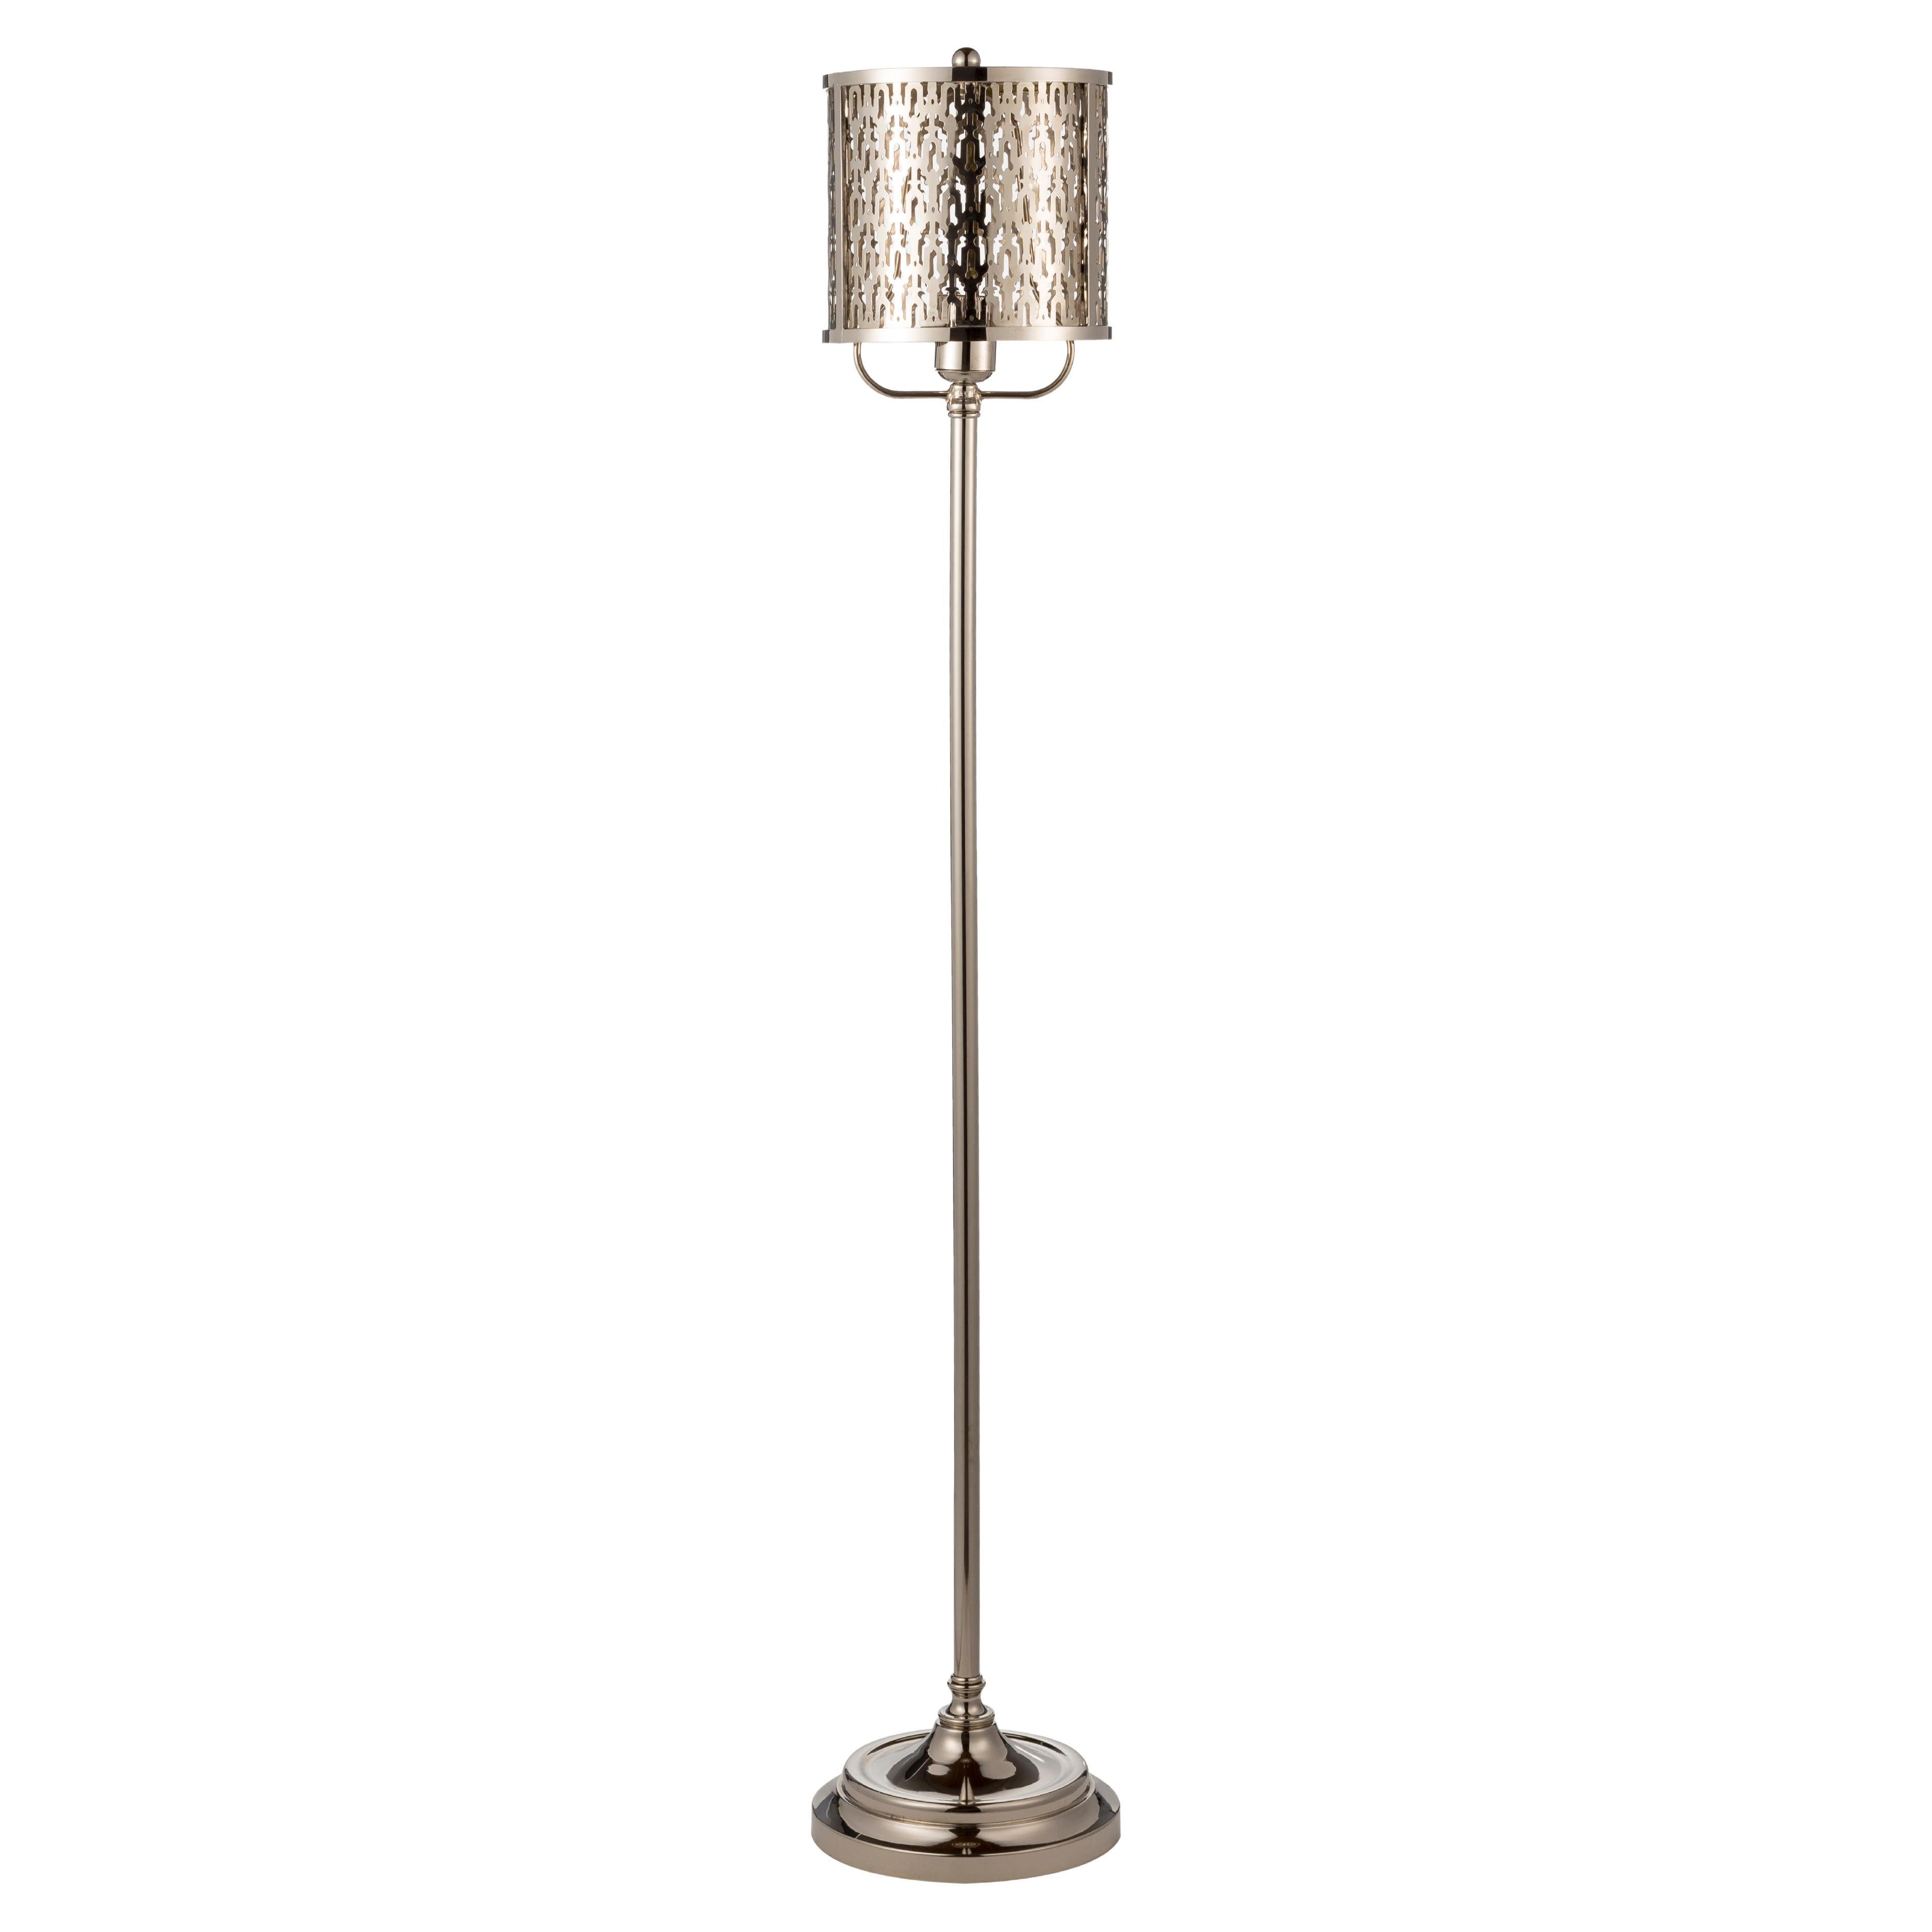 Adjustable Floor Lamp with Naural Brass Structure and Jointed Arms